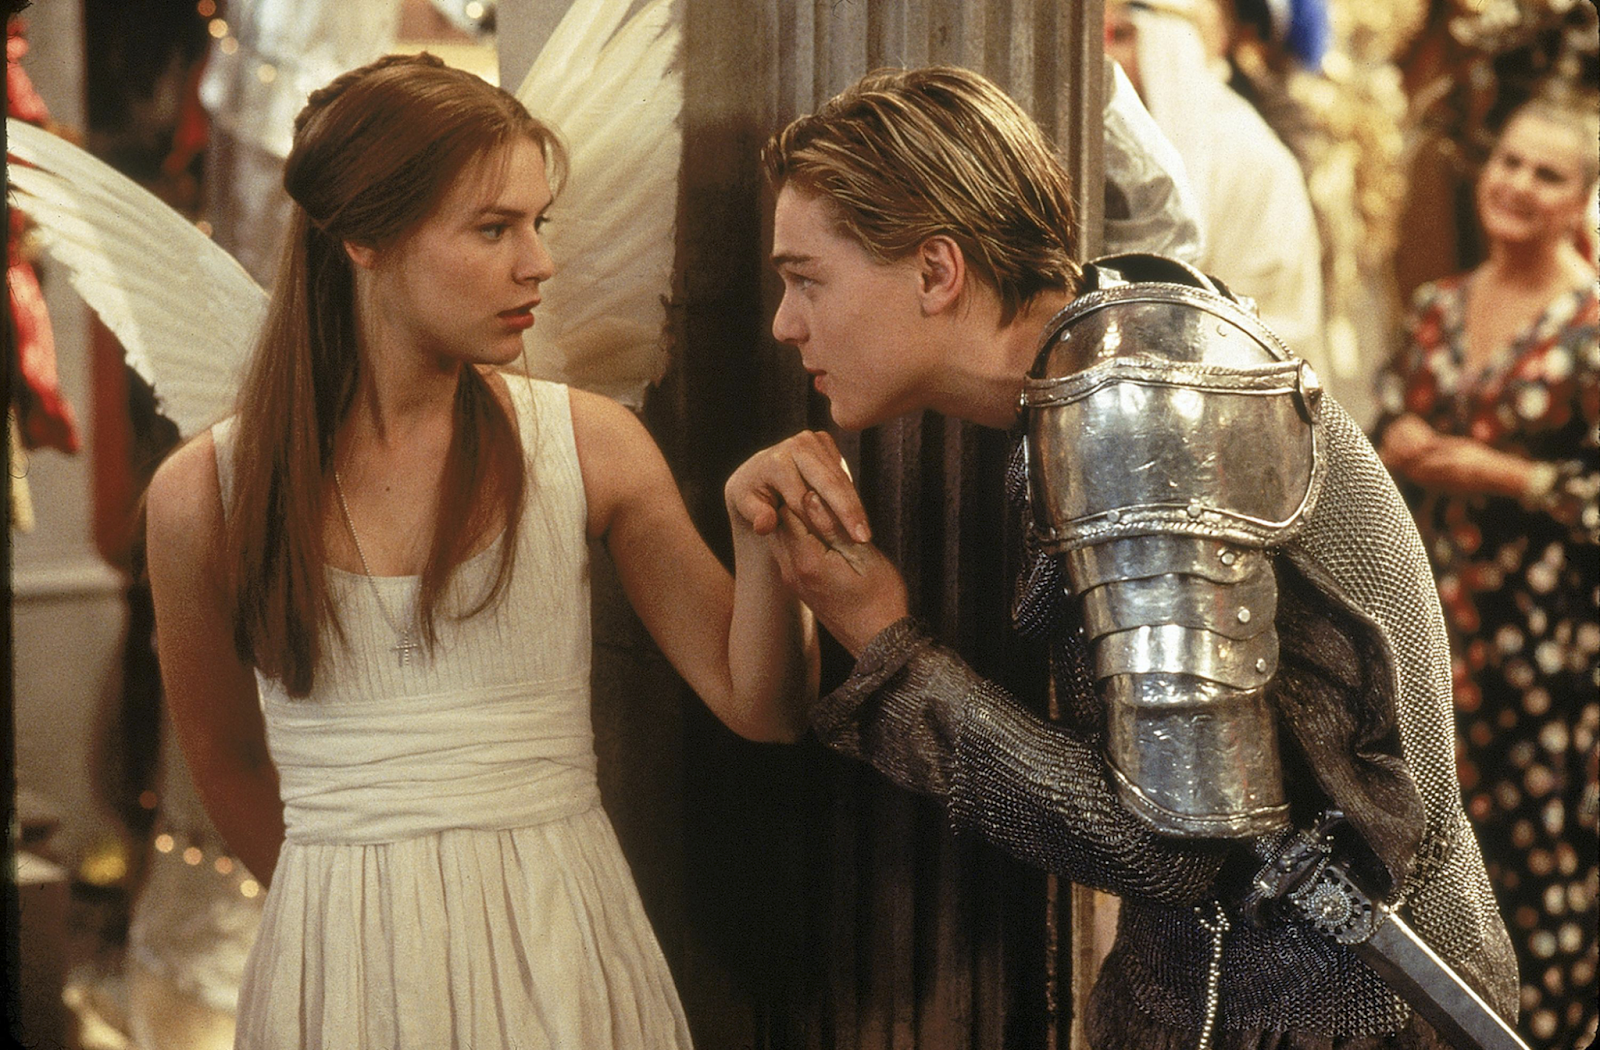 Romeo and Juliet is not a love story, not romantic, infatuation, shakespeare